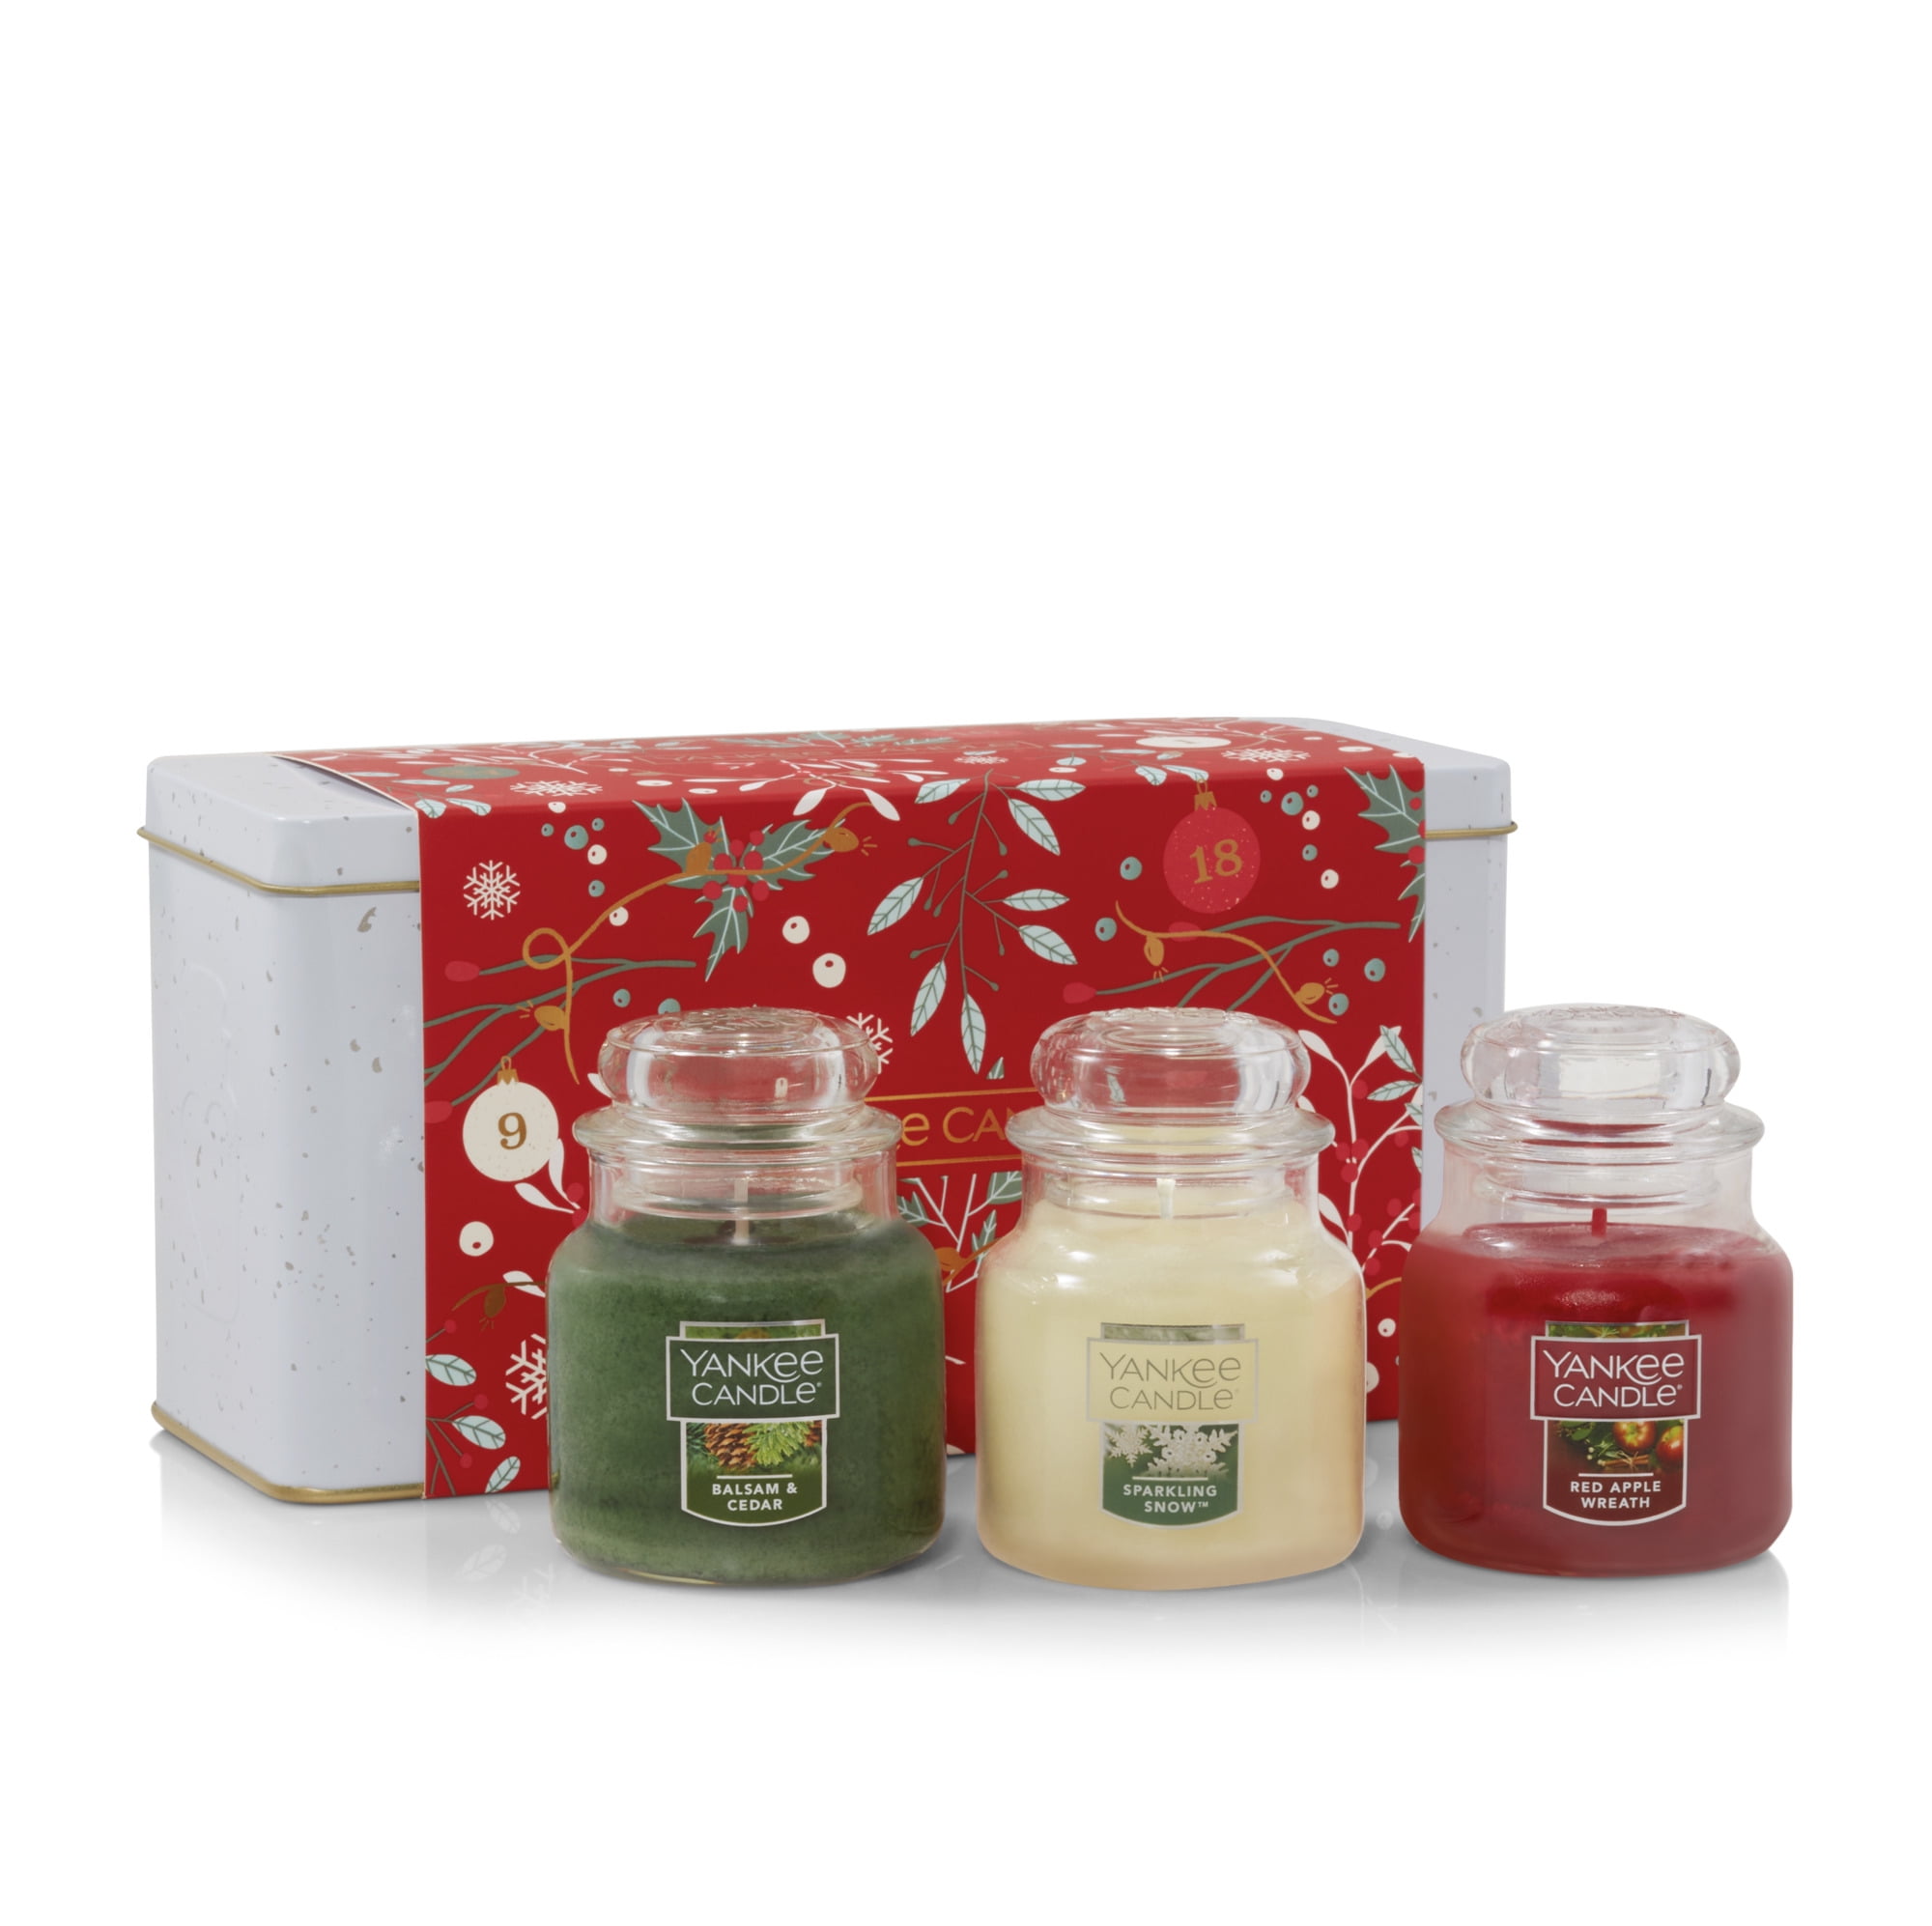 YANKEE CANDLE/SIMPLY HOME BOX SET OF 3 VOTIVES NEW choiice 